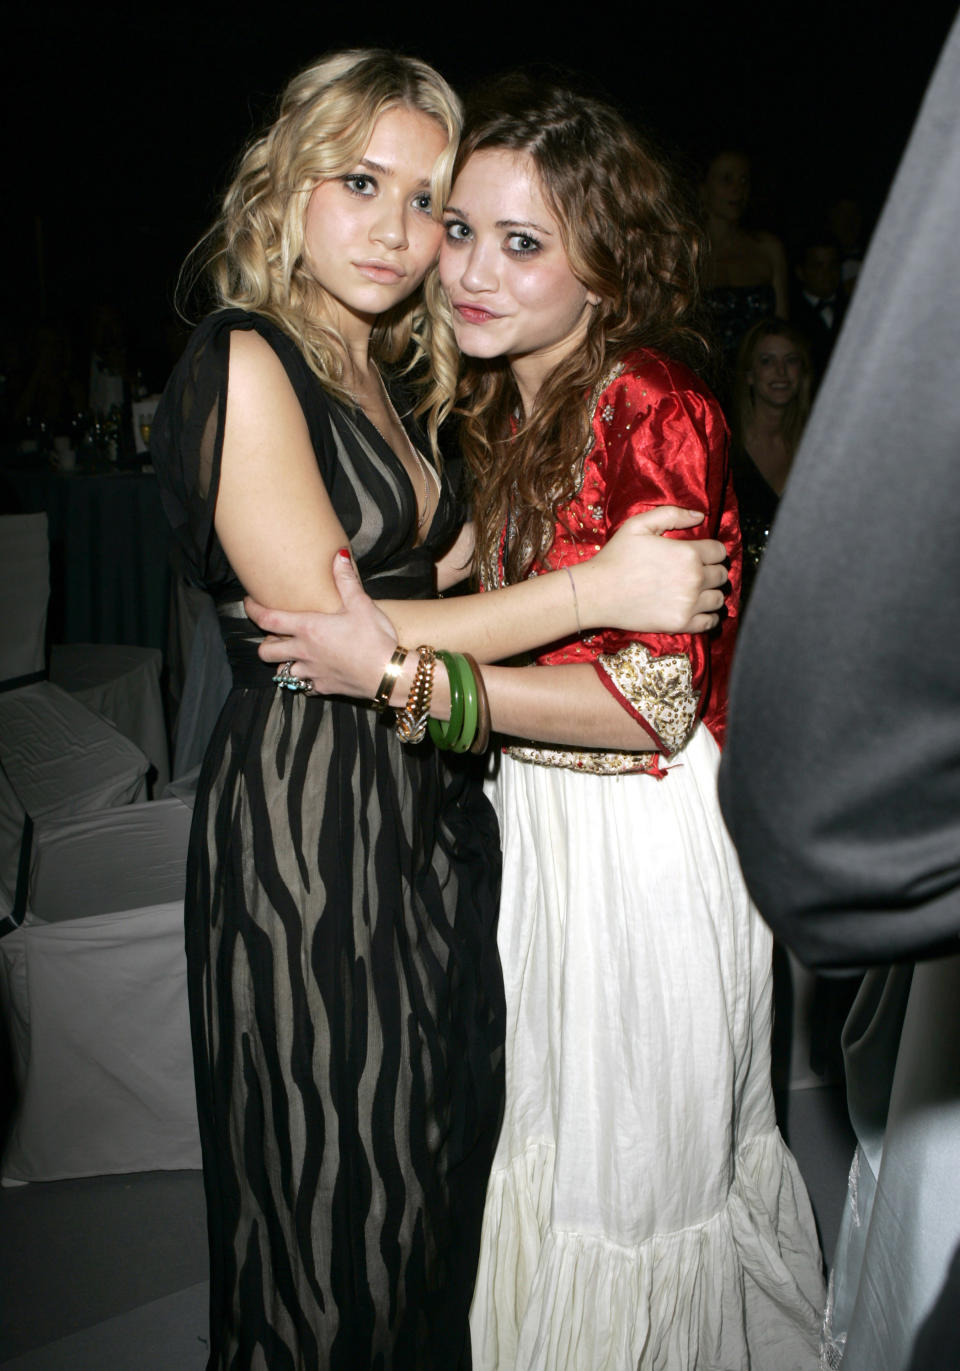 Mary-Kate and Ashley embracing